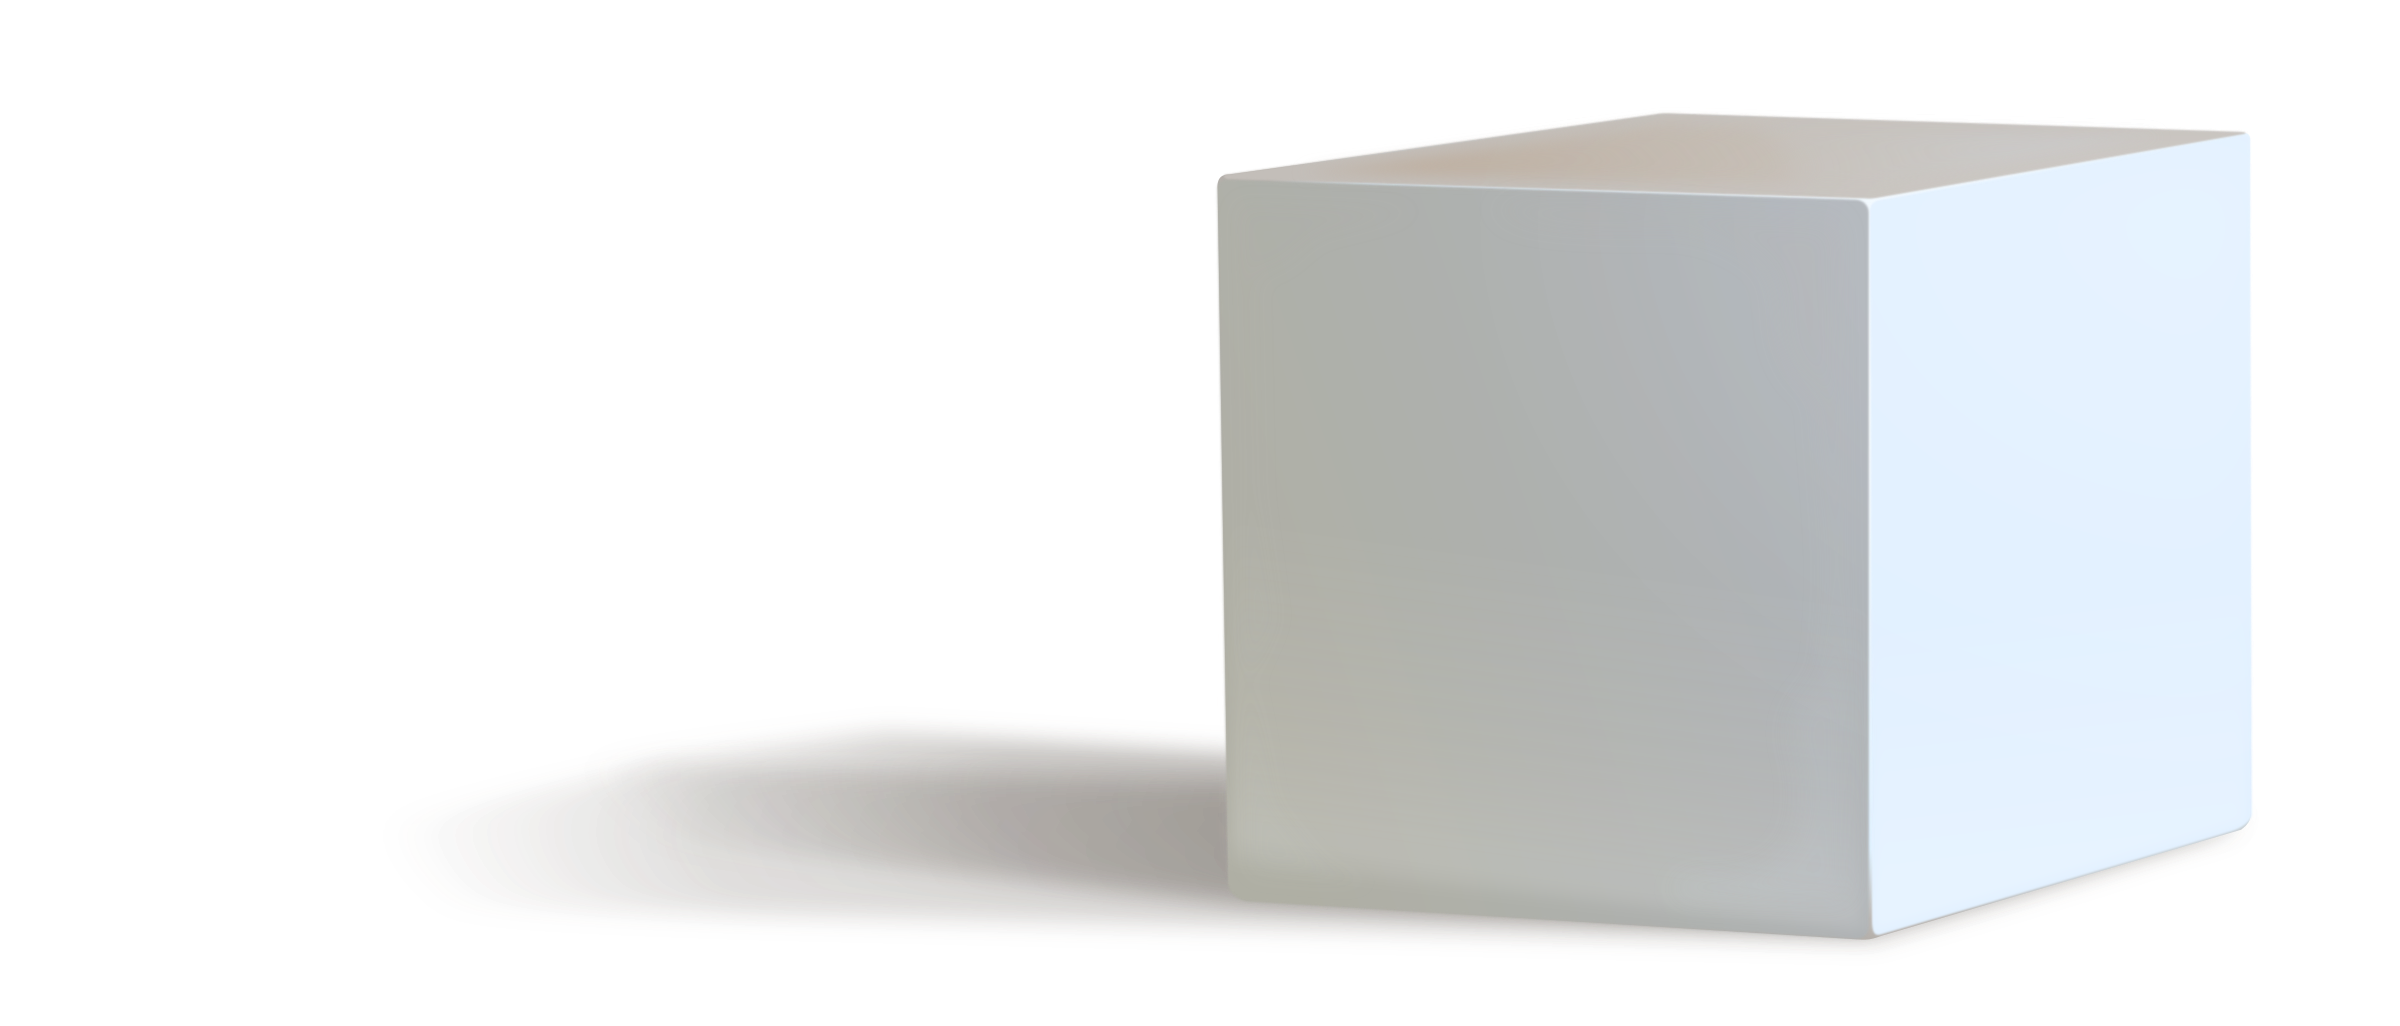 Cube PNG Free Download